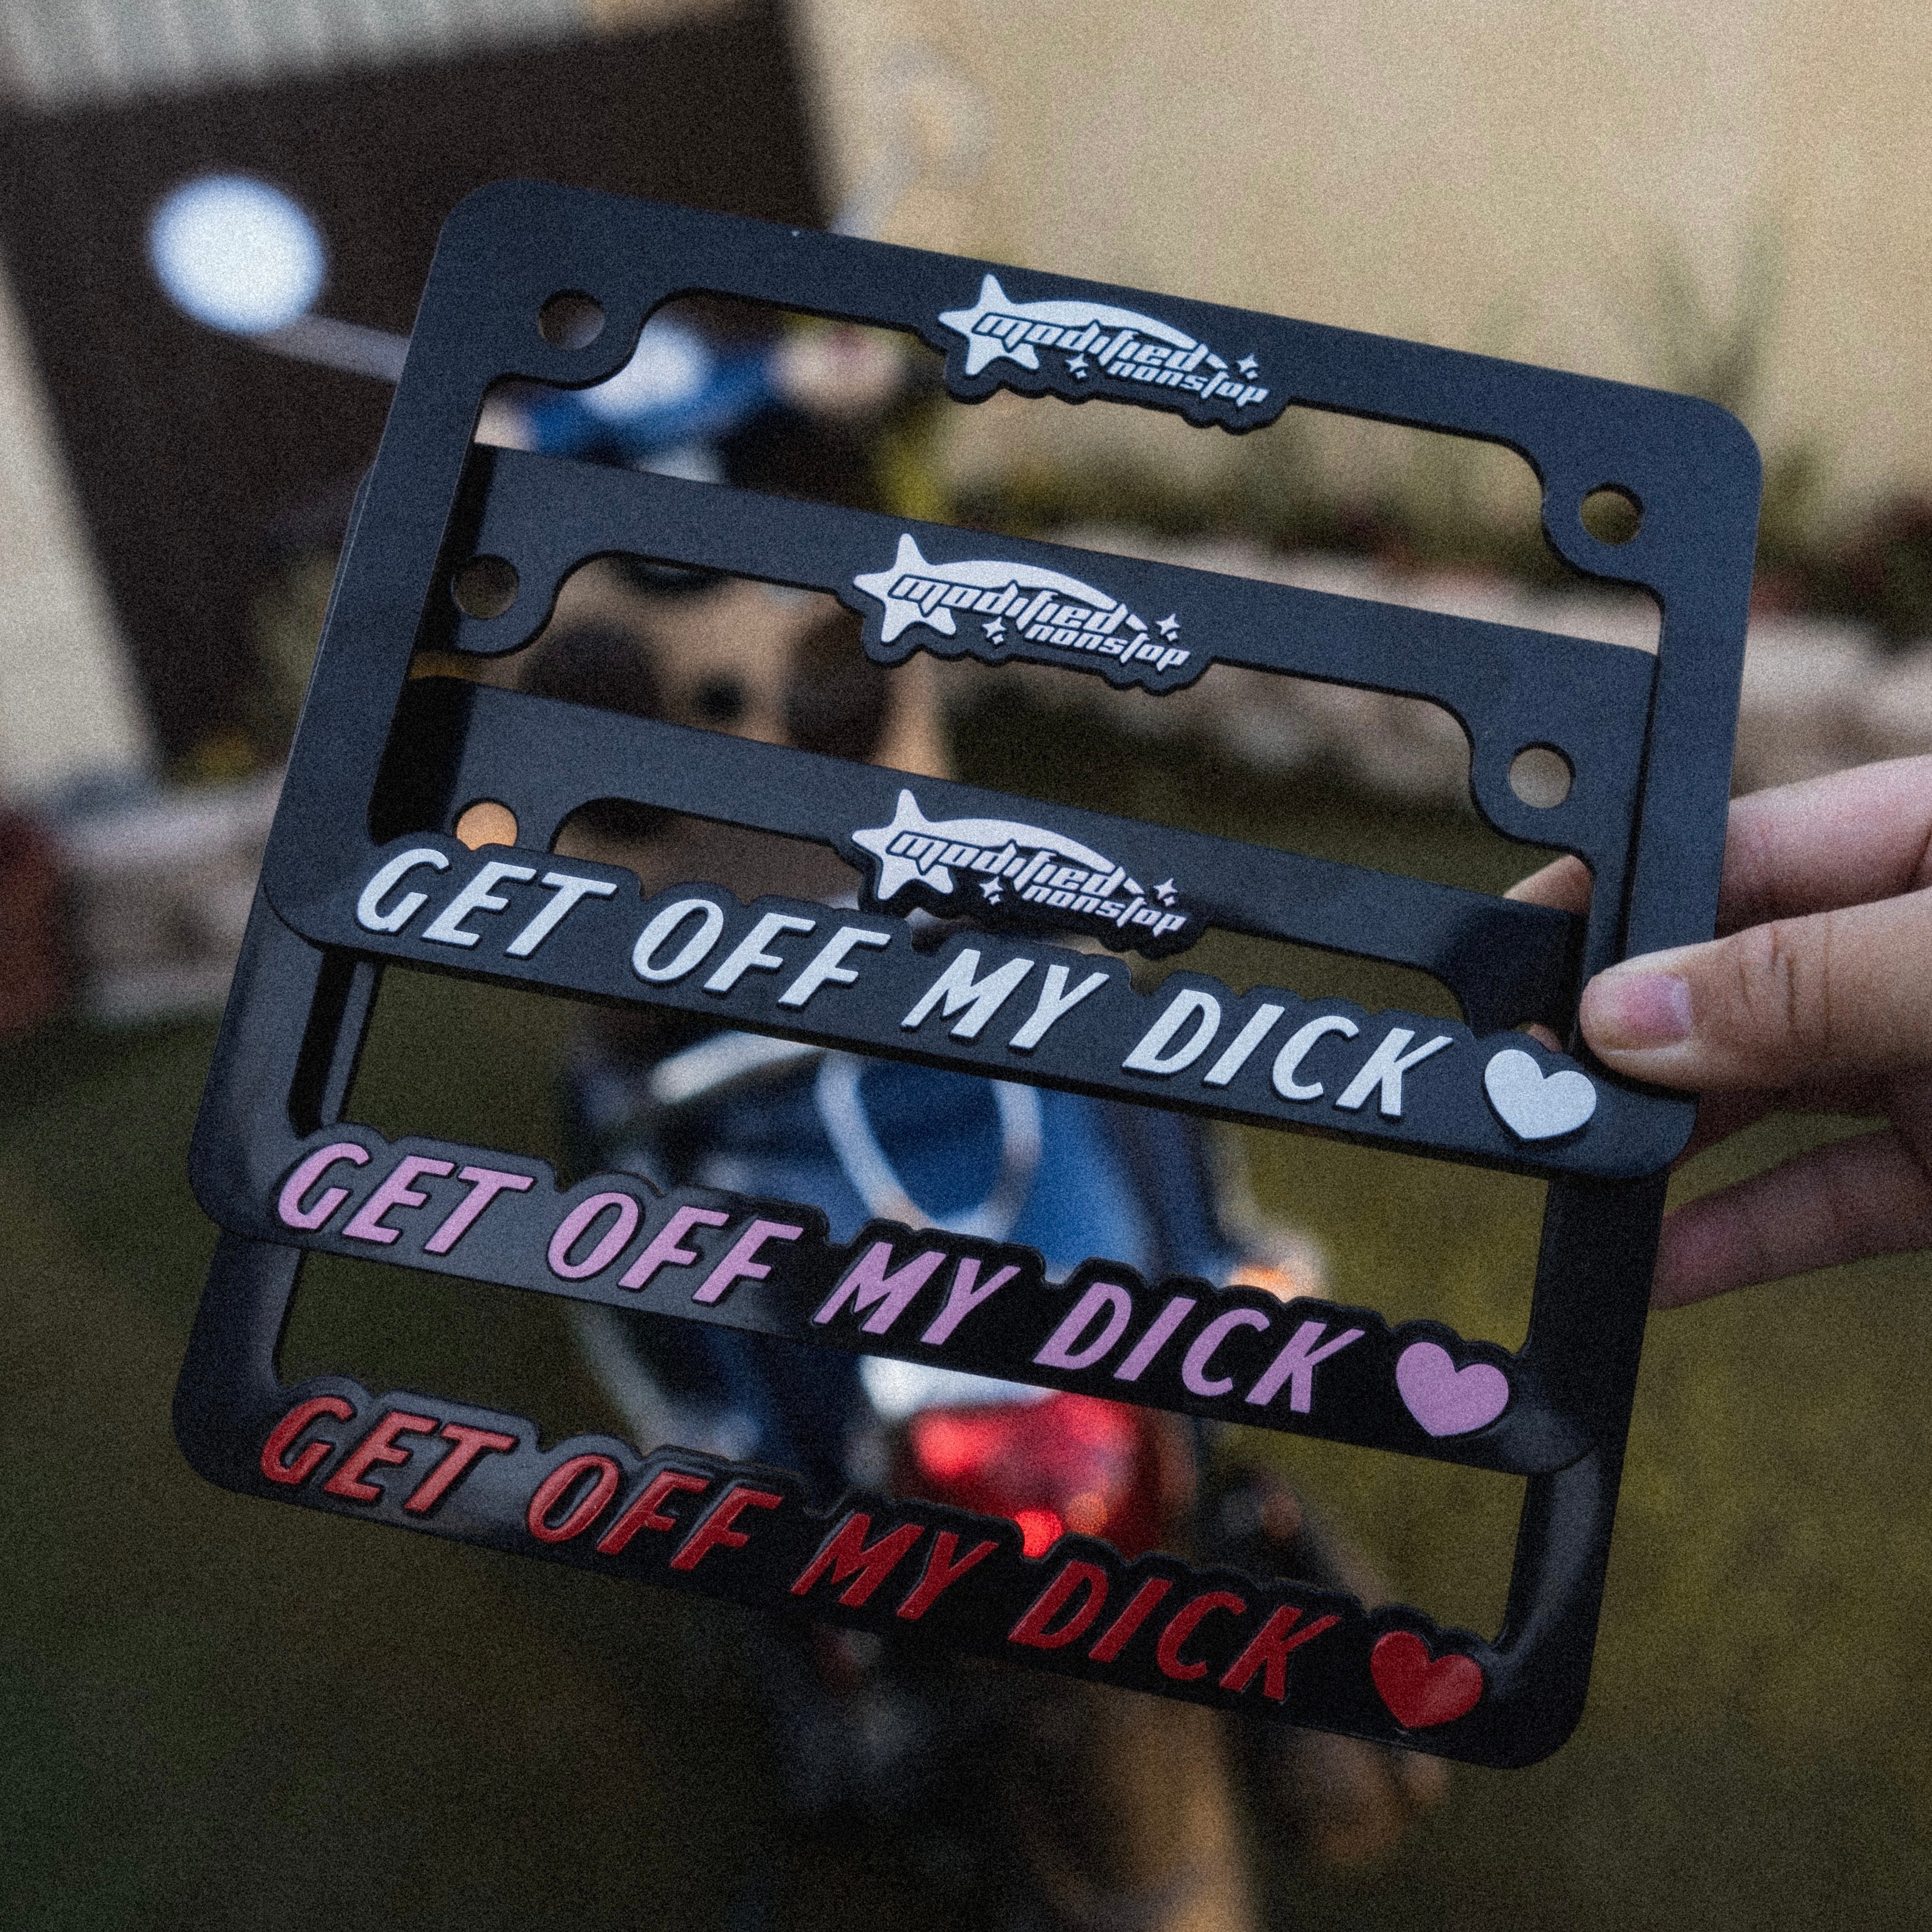 Get Off My Dick Motorcycle License Plate Frame